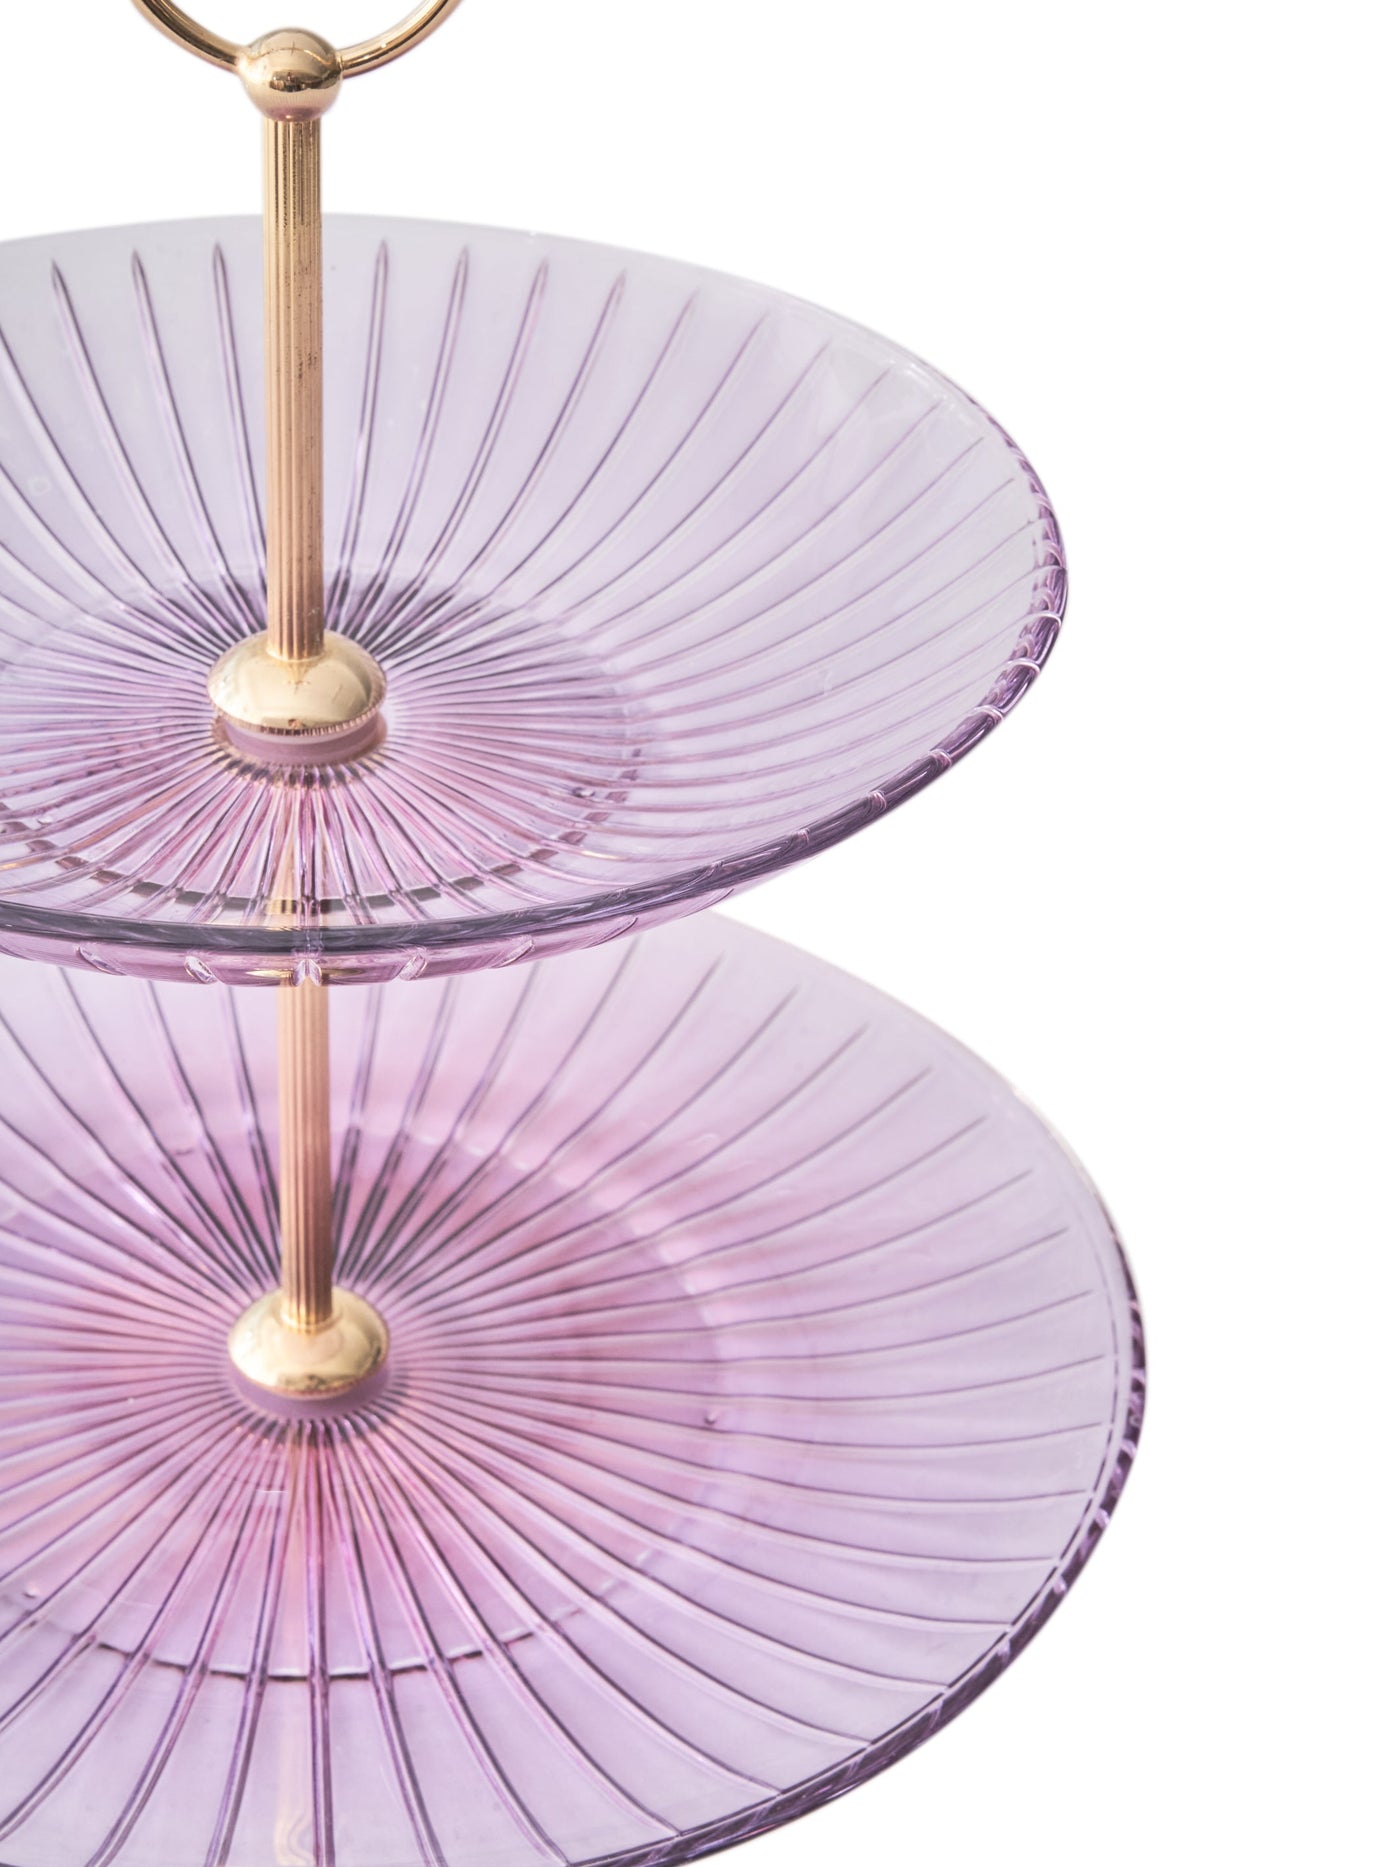 Ada Purple Tiered Stand for Afternoon Tea by Creart